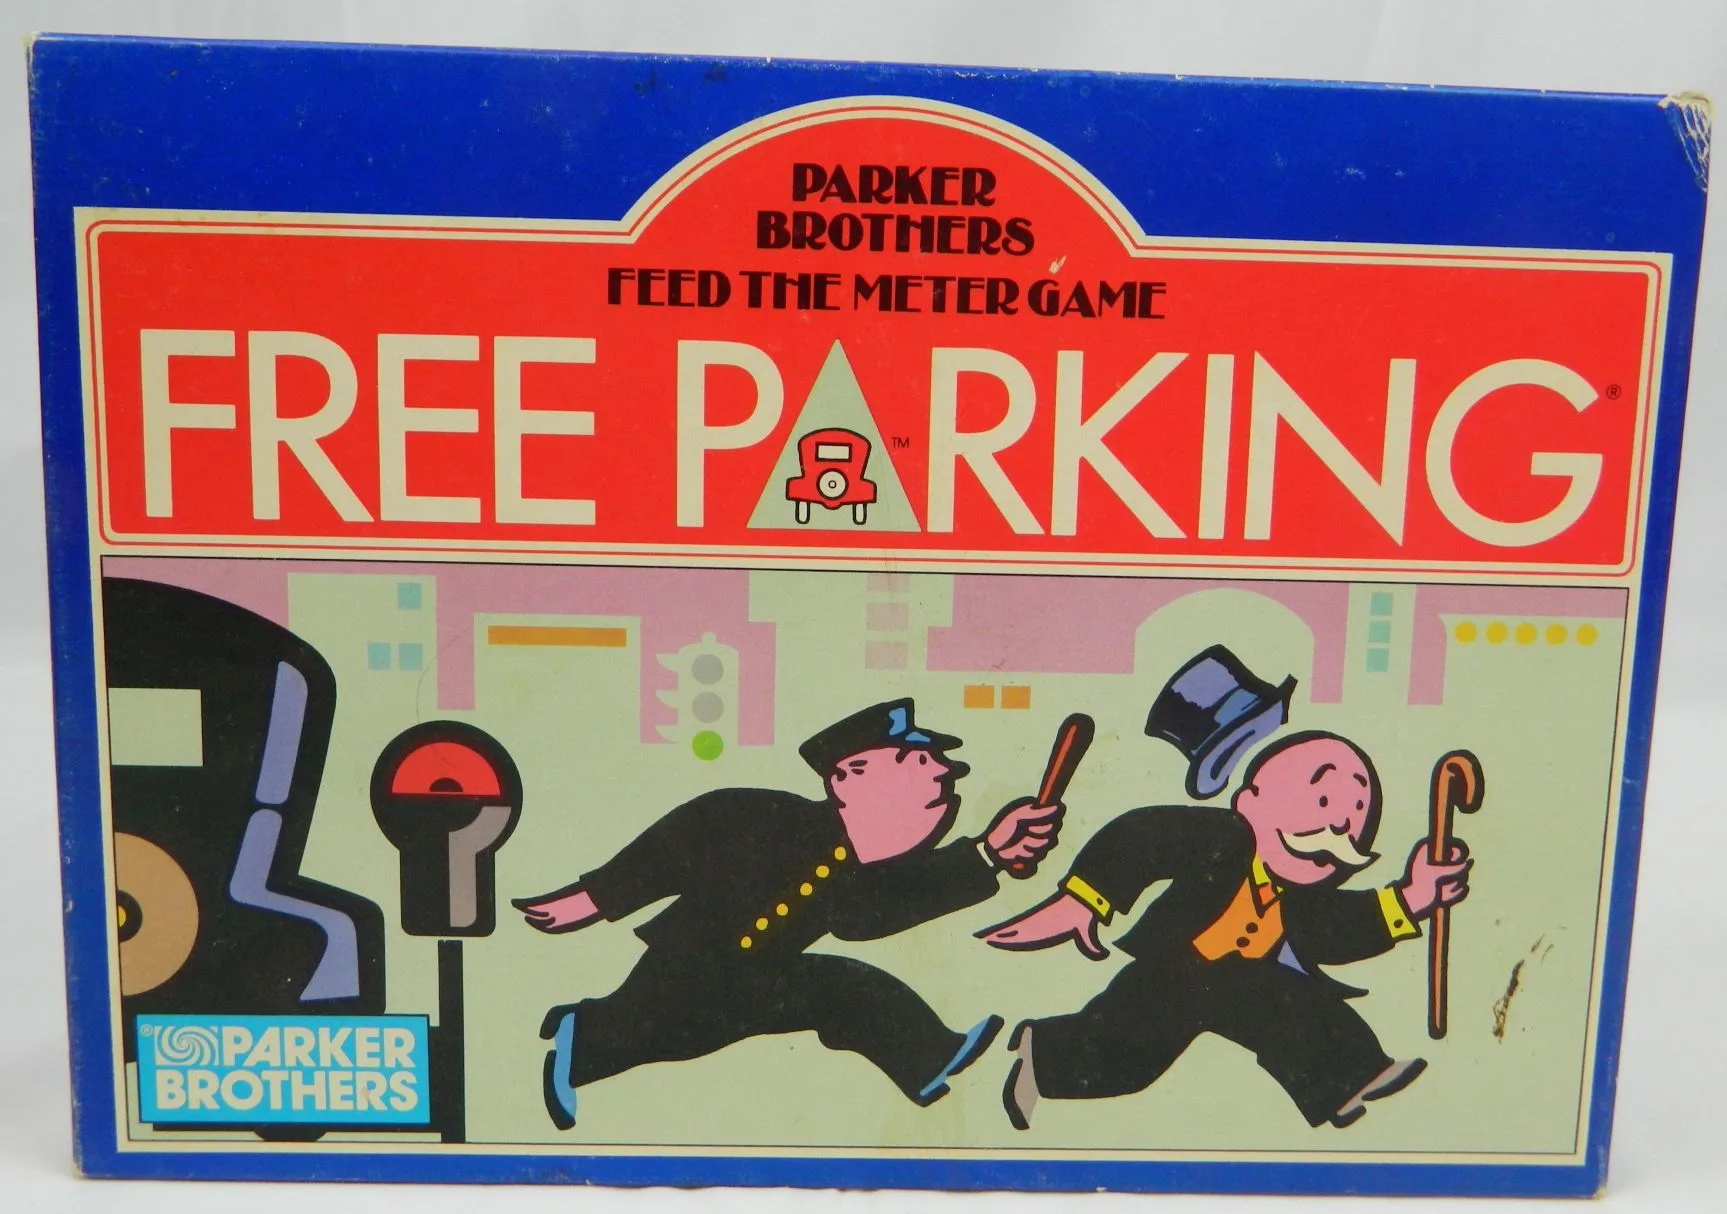 Box for Free Parking